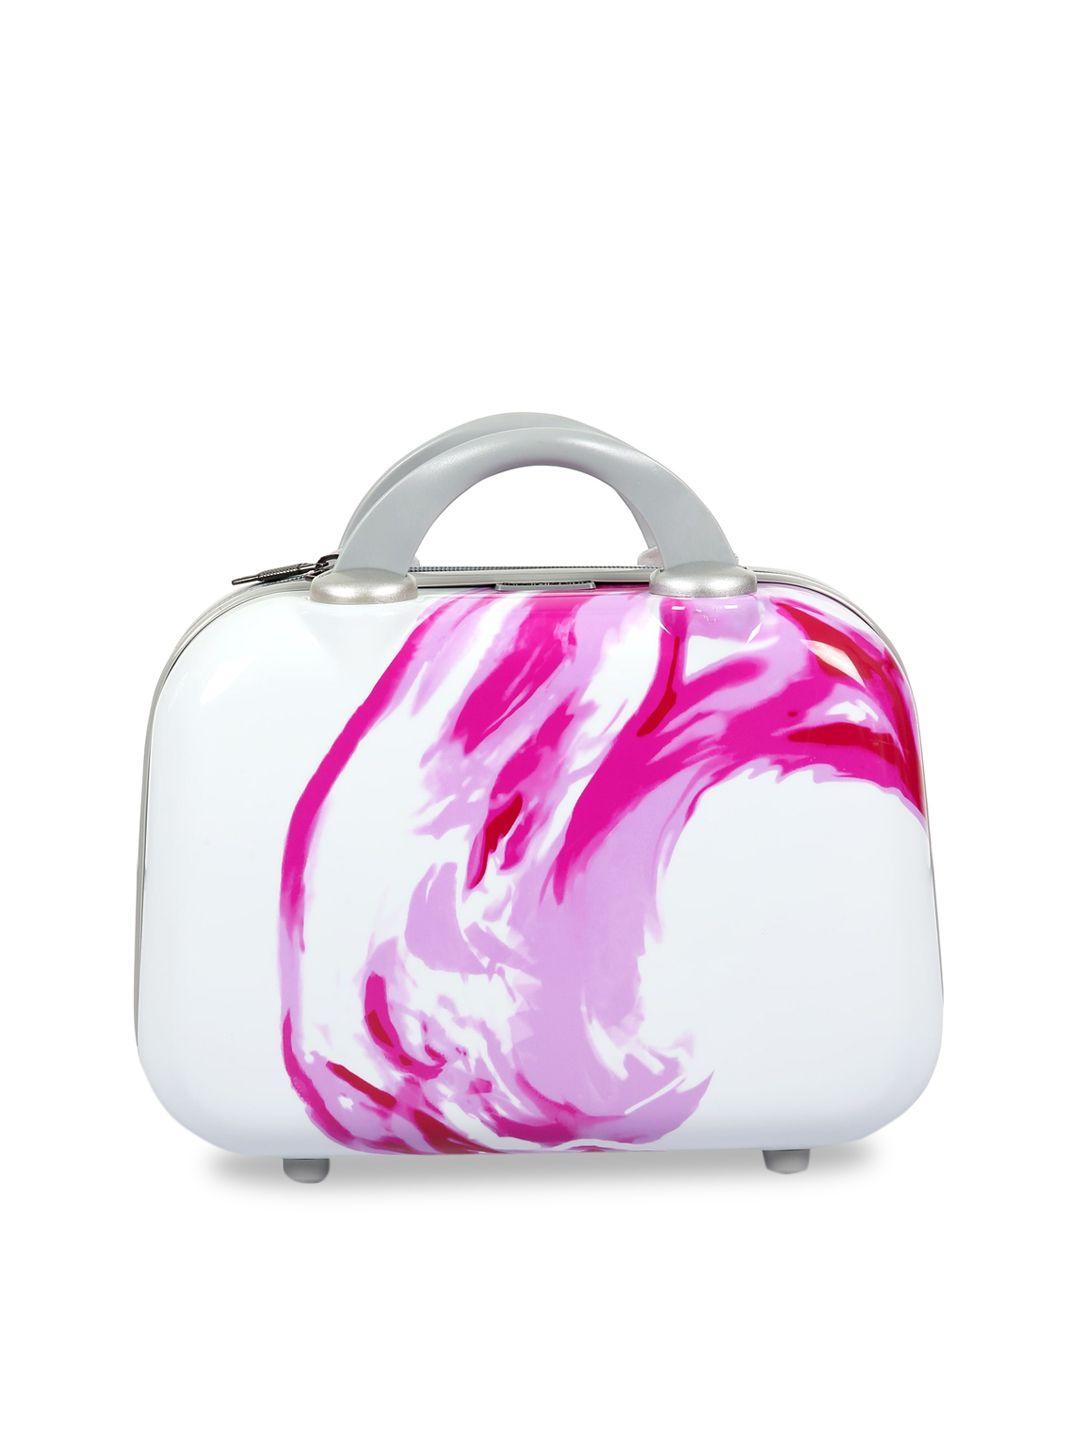 polo-class-unisex-pink-&-white-printed-vanity-cabin-trolley-bags